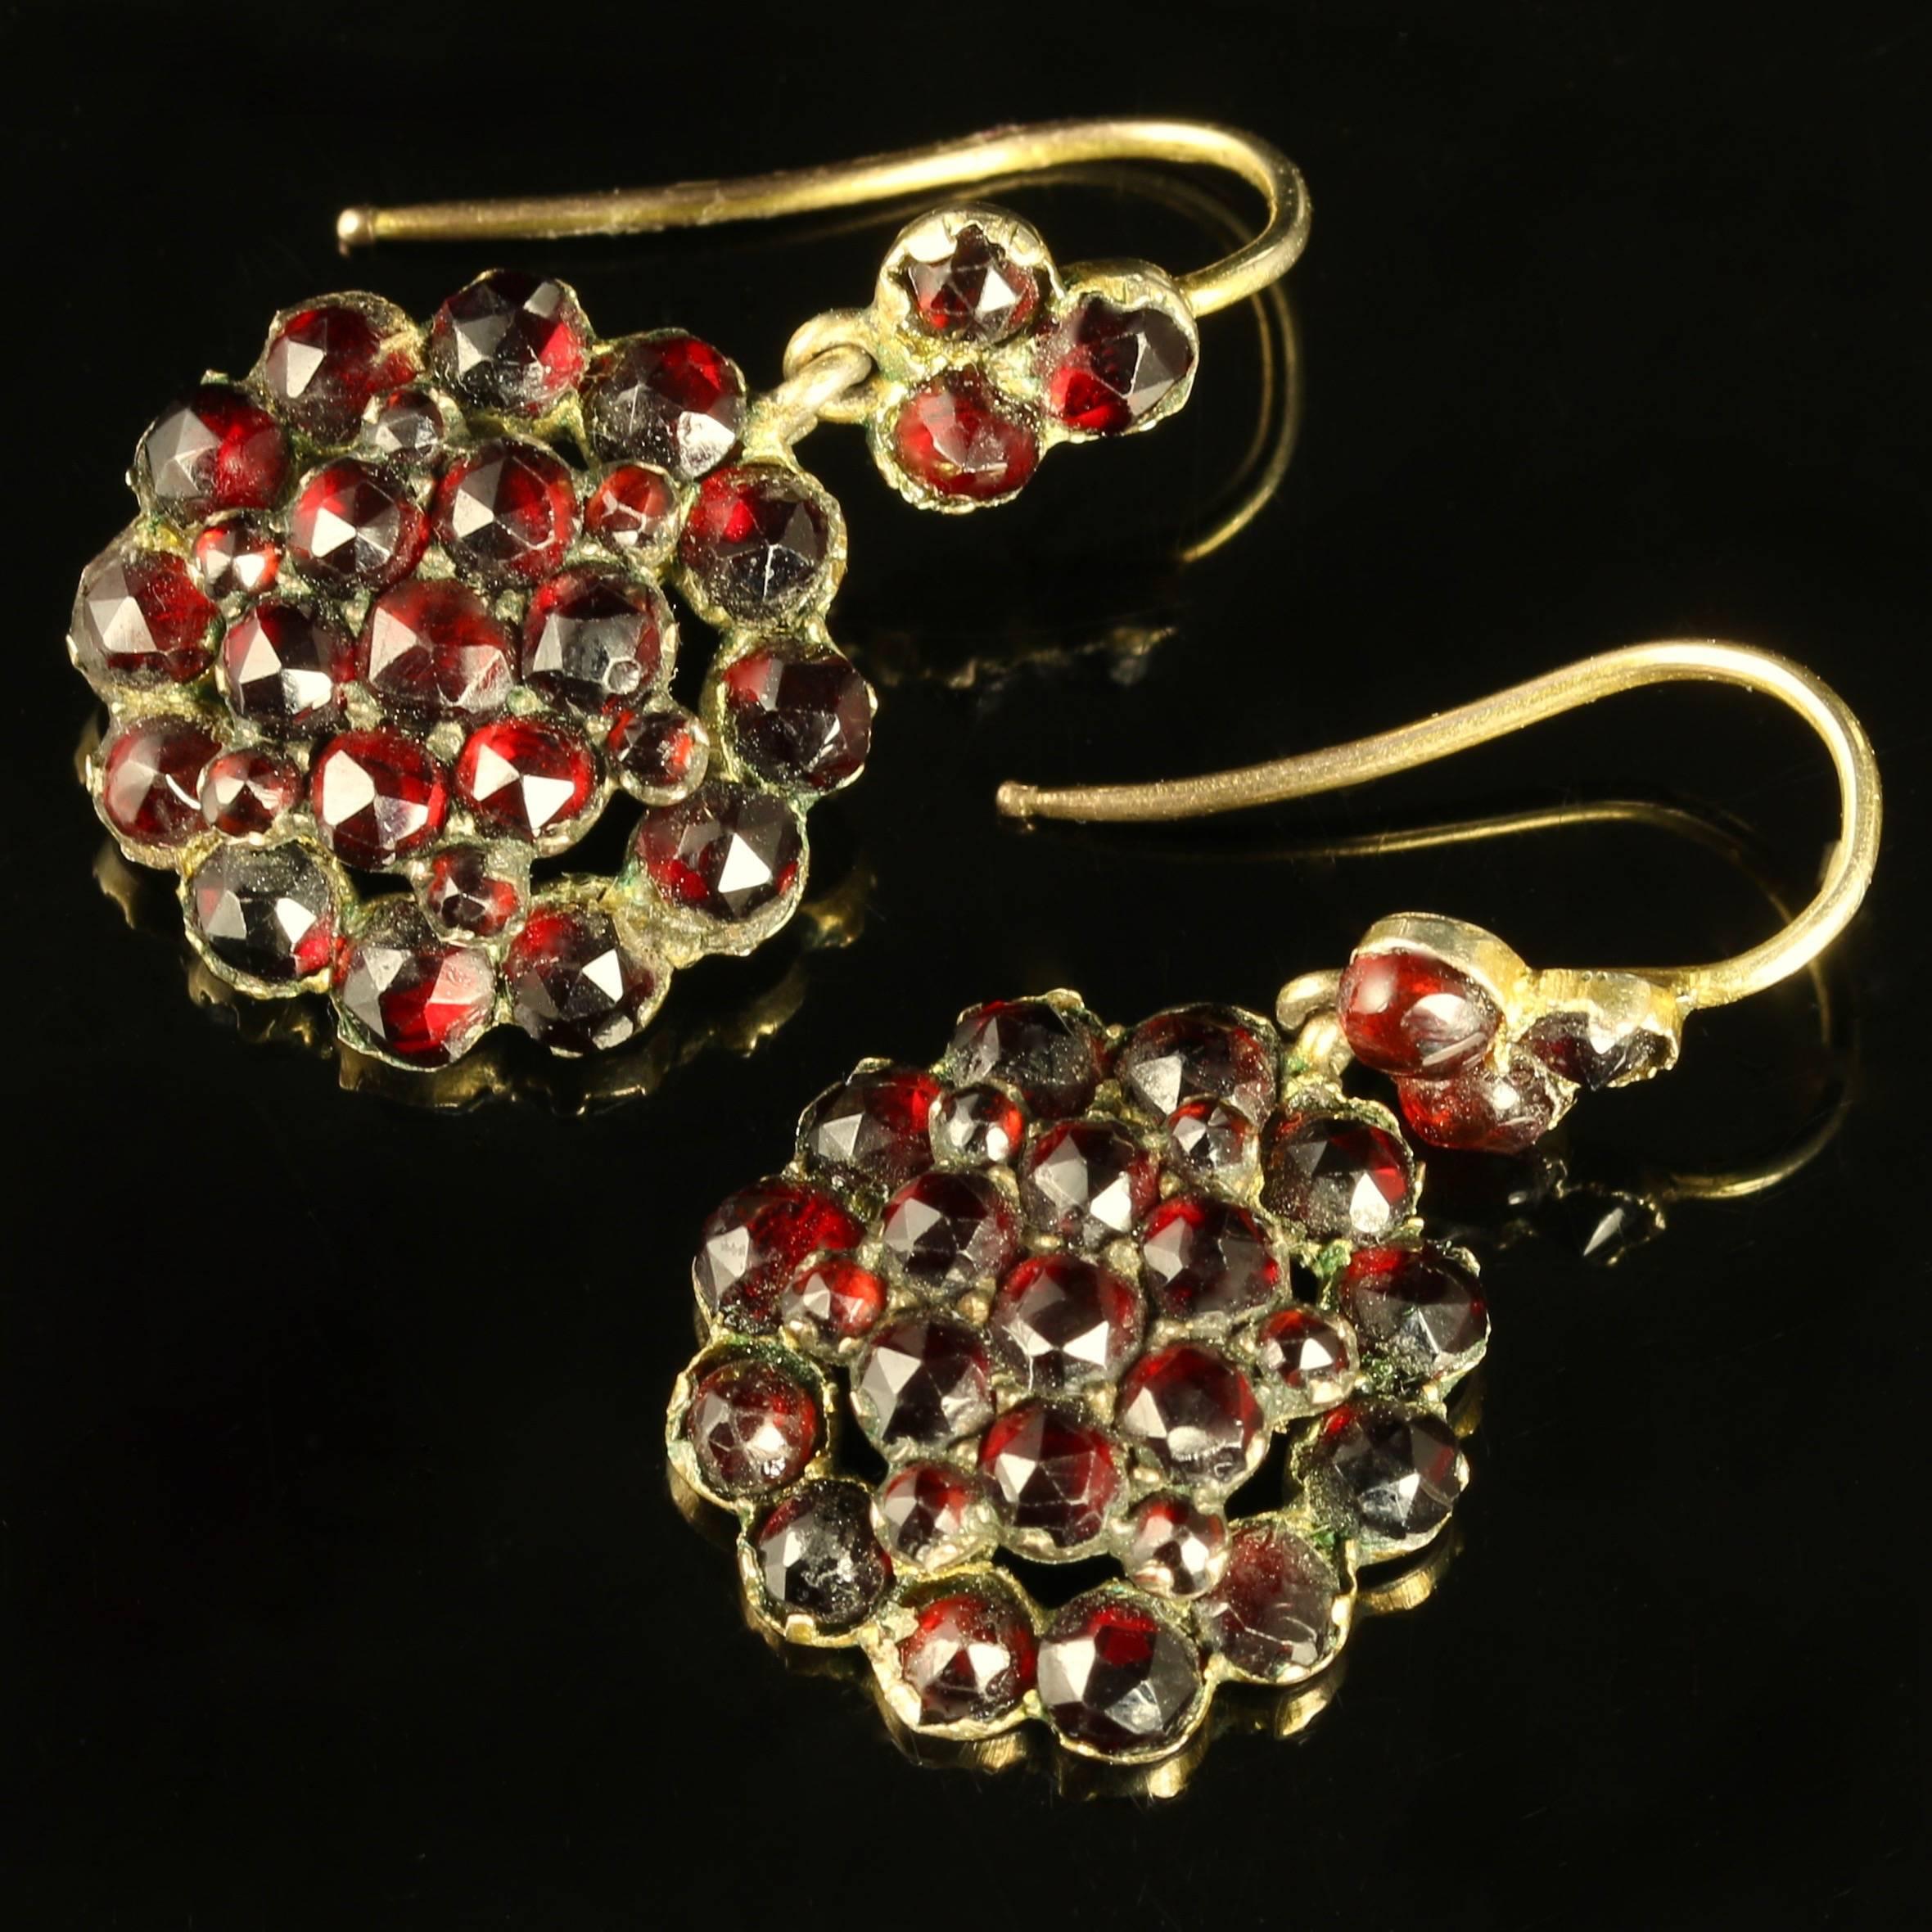 These stunning Bohemian Garnet earrings are circa 1880.

A fabulous pair of earrings which are set on 18ct Gold wires.

Beautiful rich faceted deep Red Garnets adorn these beautiful earrings.

The Garnet is a stone of purity and truth as well as a